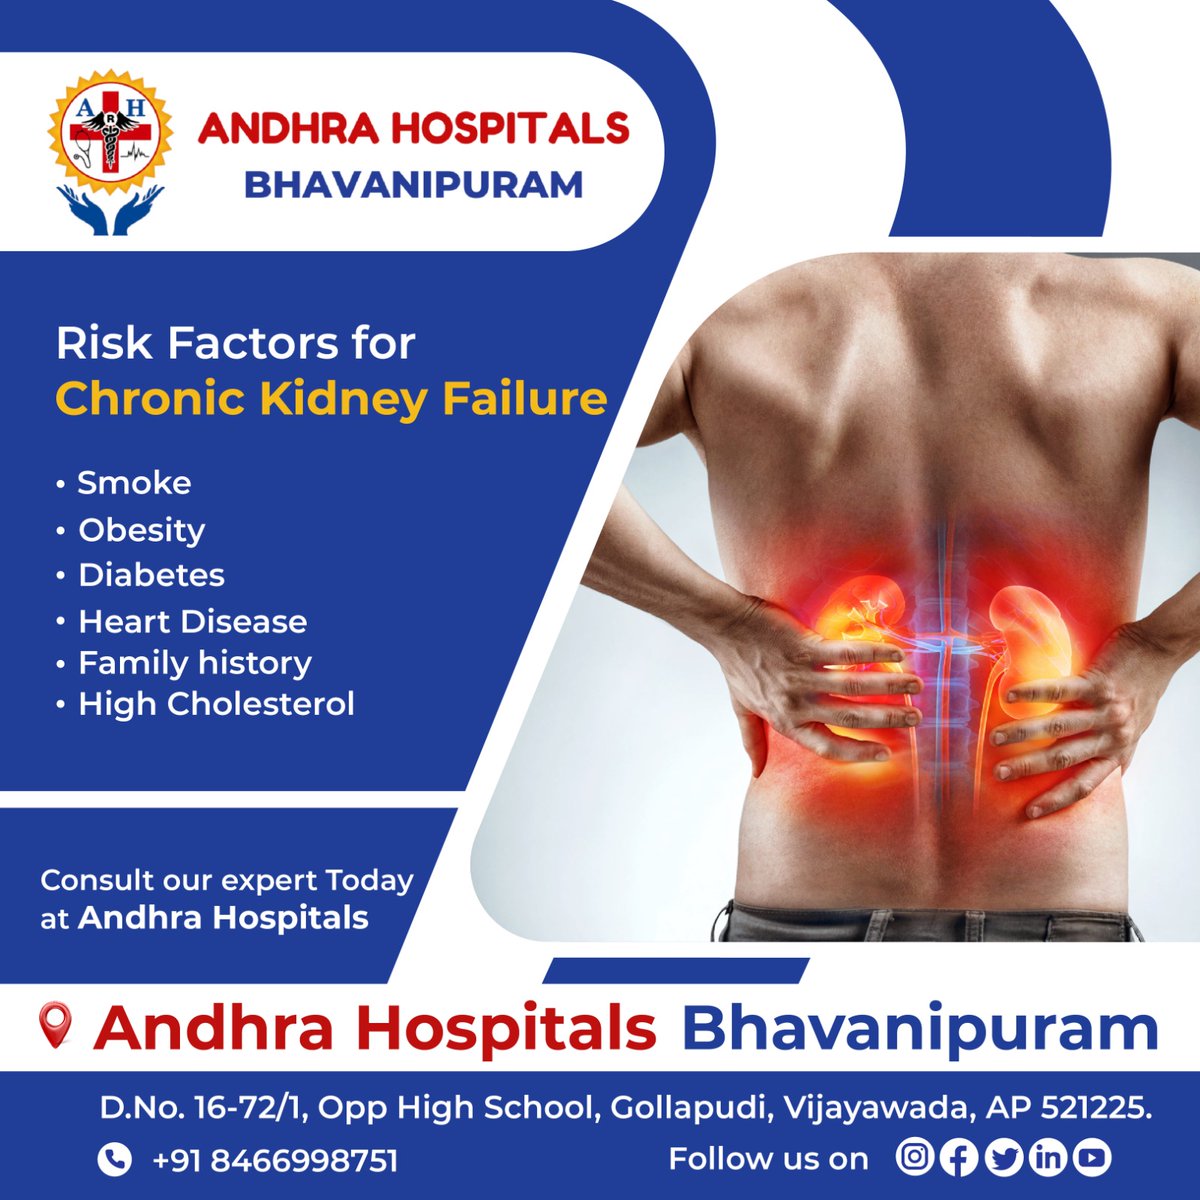 Chronic kidney disease is a condition where an individual faces the steady loss of kidney function. This is called chronic kidney failure.
#andhrahospitalsbhavanipuram #AndhraHospitals #bhavanipuram #kidneyproblem #kidneypain #kindneyfunction #kidneydisease #kidneytransplant